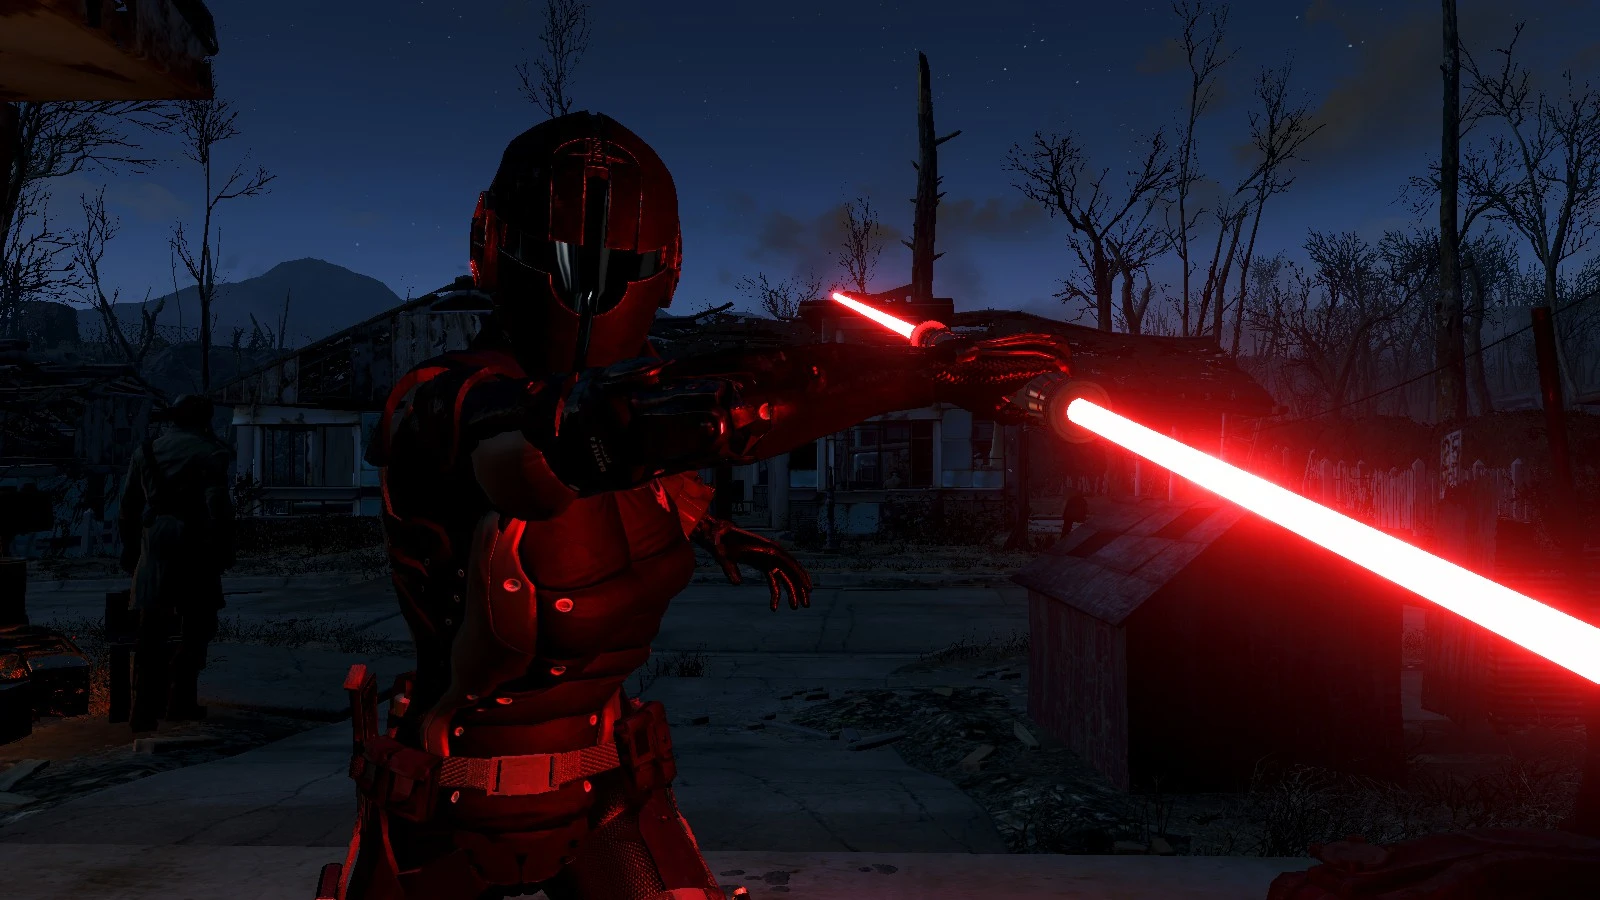 Star wars the lightsaber fallout 4 фото 2